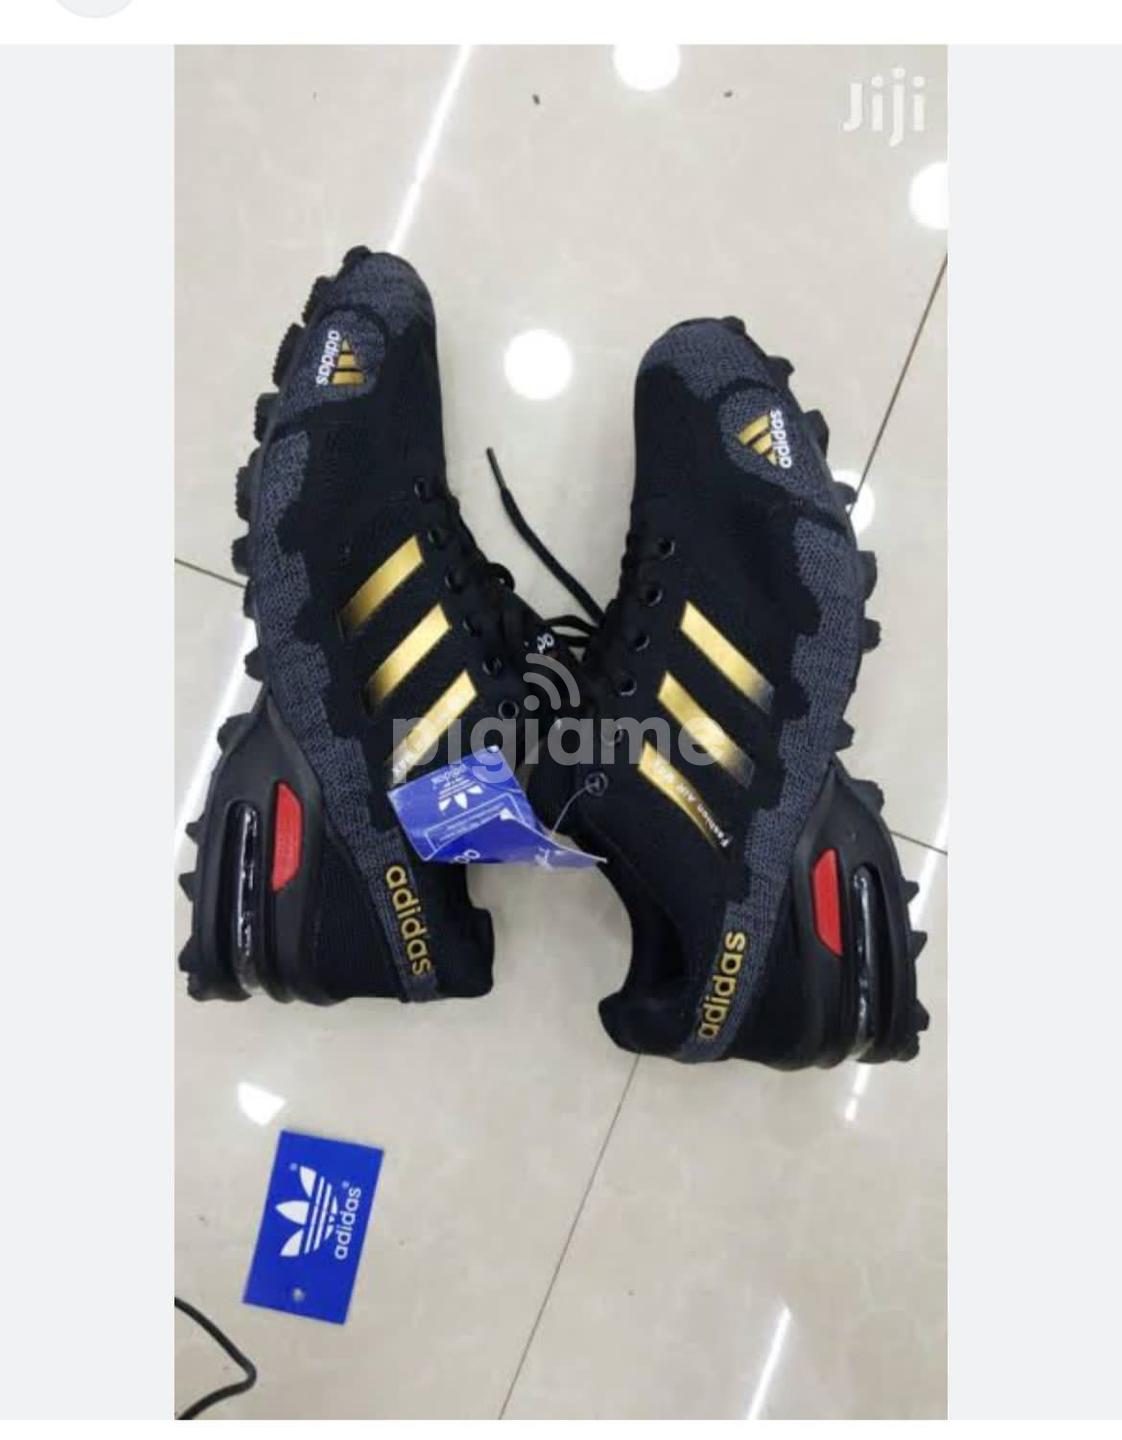 Adidas ZX flux black gold  Black and gold sneakers, Shoes, Sneakers